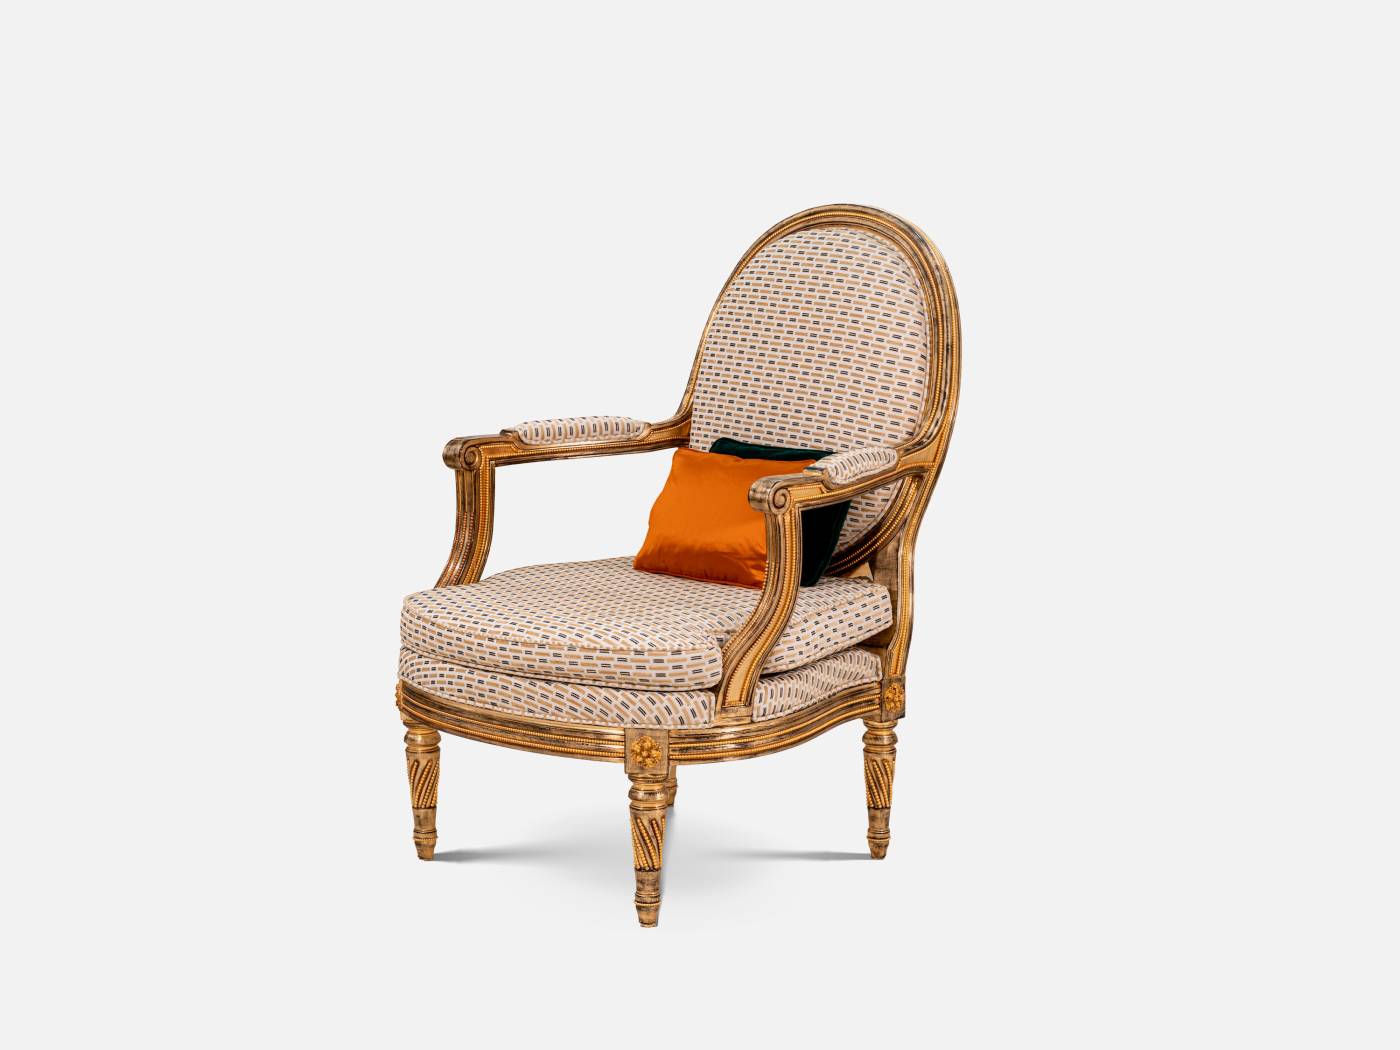 ART. 2315 – Discover the elegance of luxury classic Armchairs made in Italy by C.G. Capelletti. Luxury classic furniture that combines style and craftsmanship.